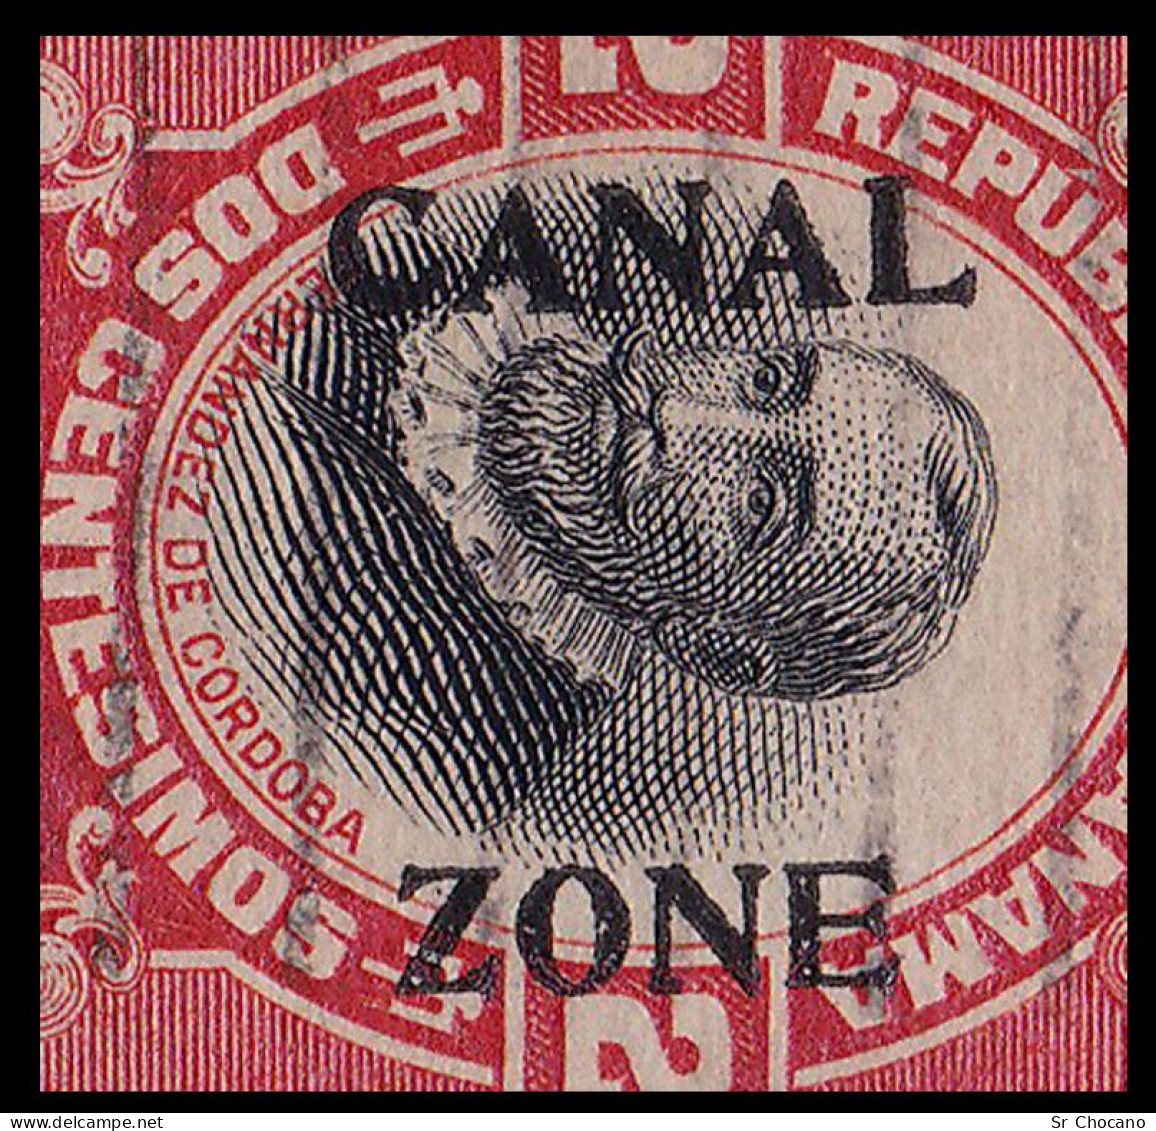 CANAL ZONE.1915-20.2c.SCOTT 47.Type III.USED - Zona Del Canale / Canal Zone